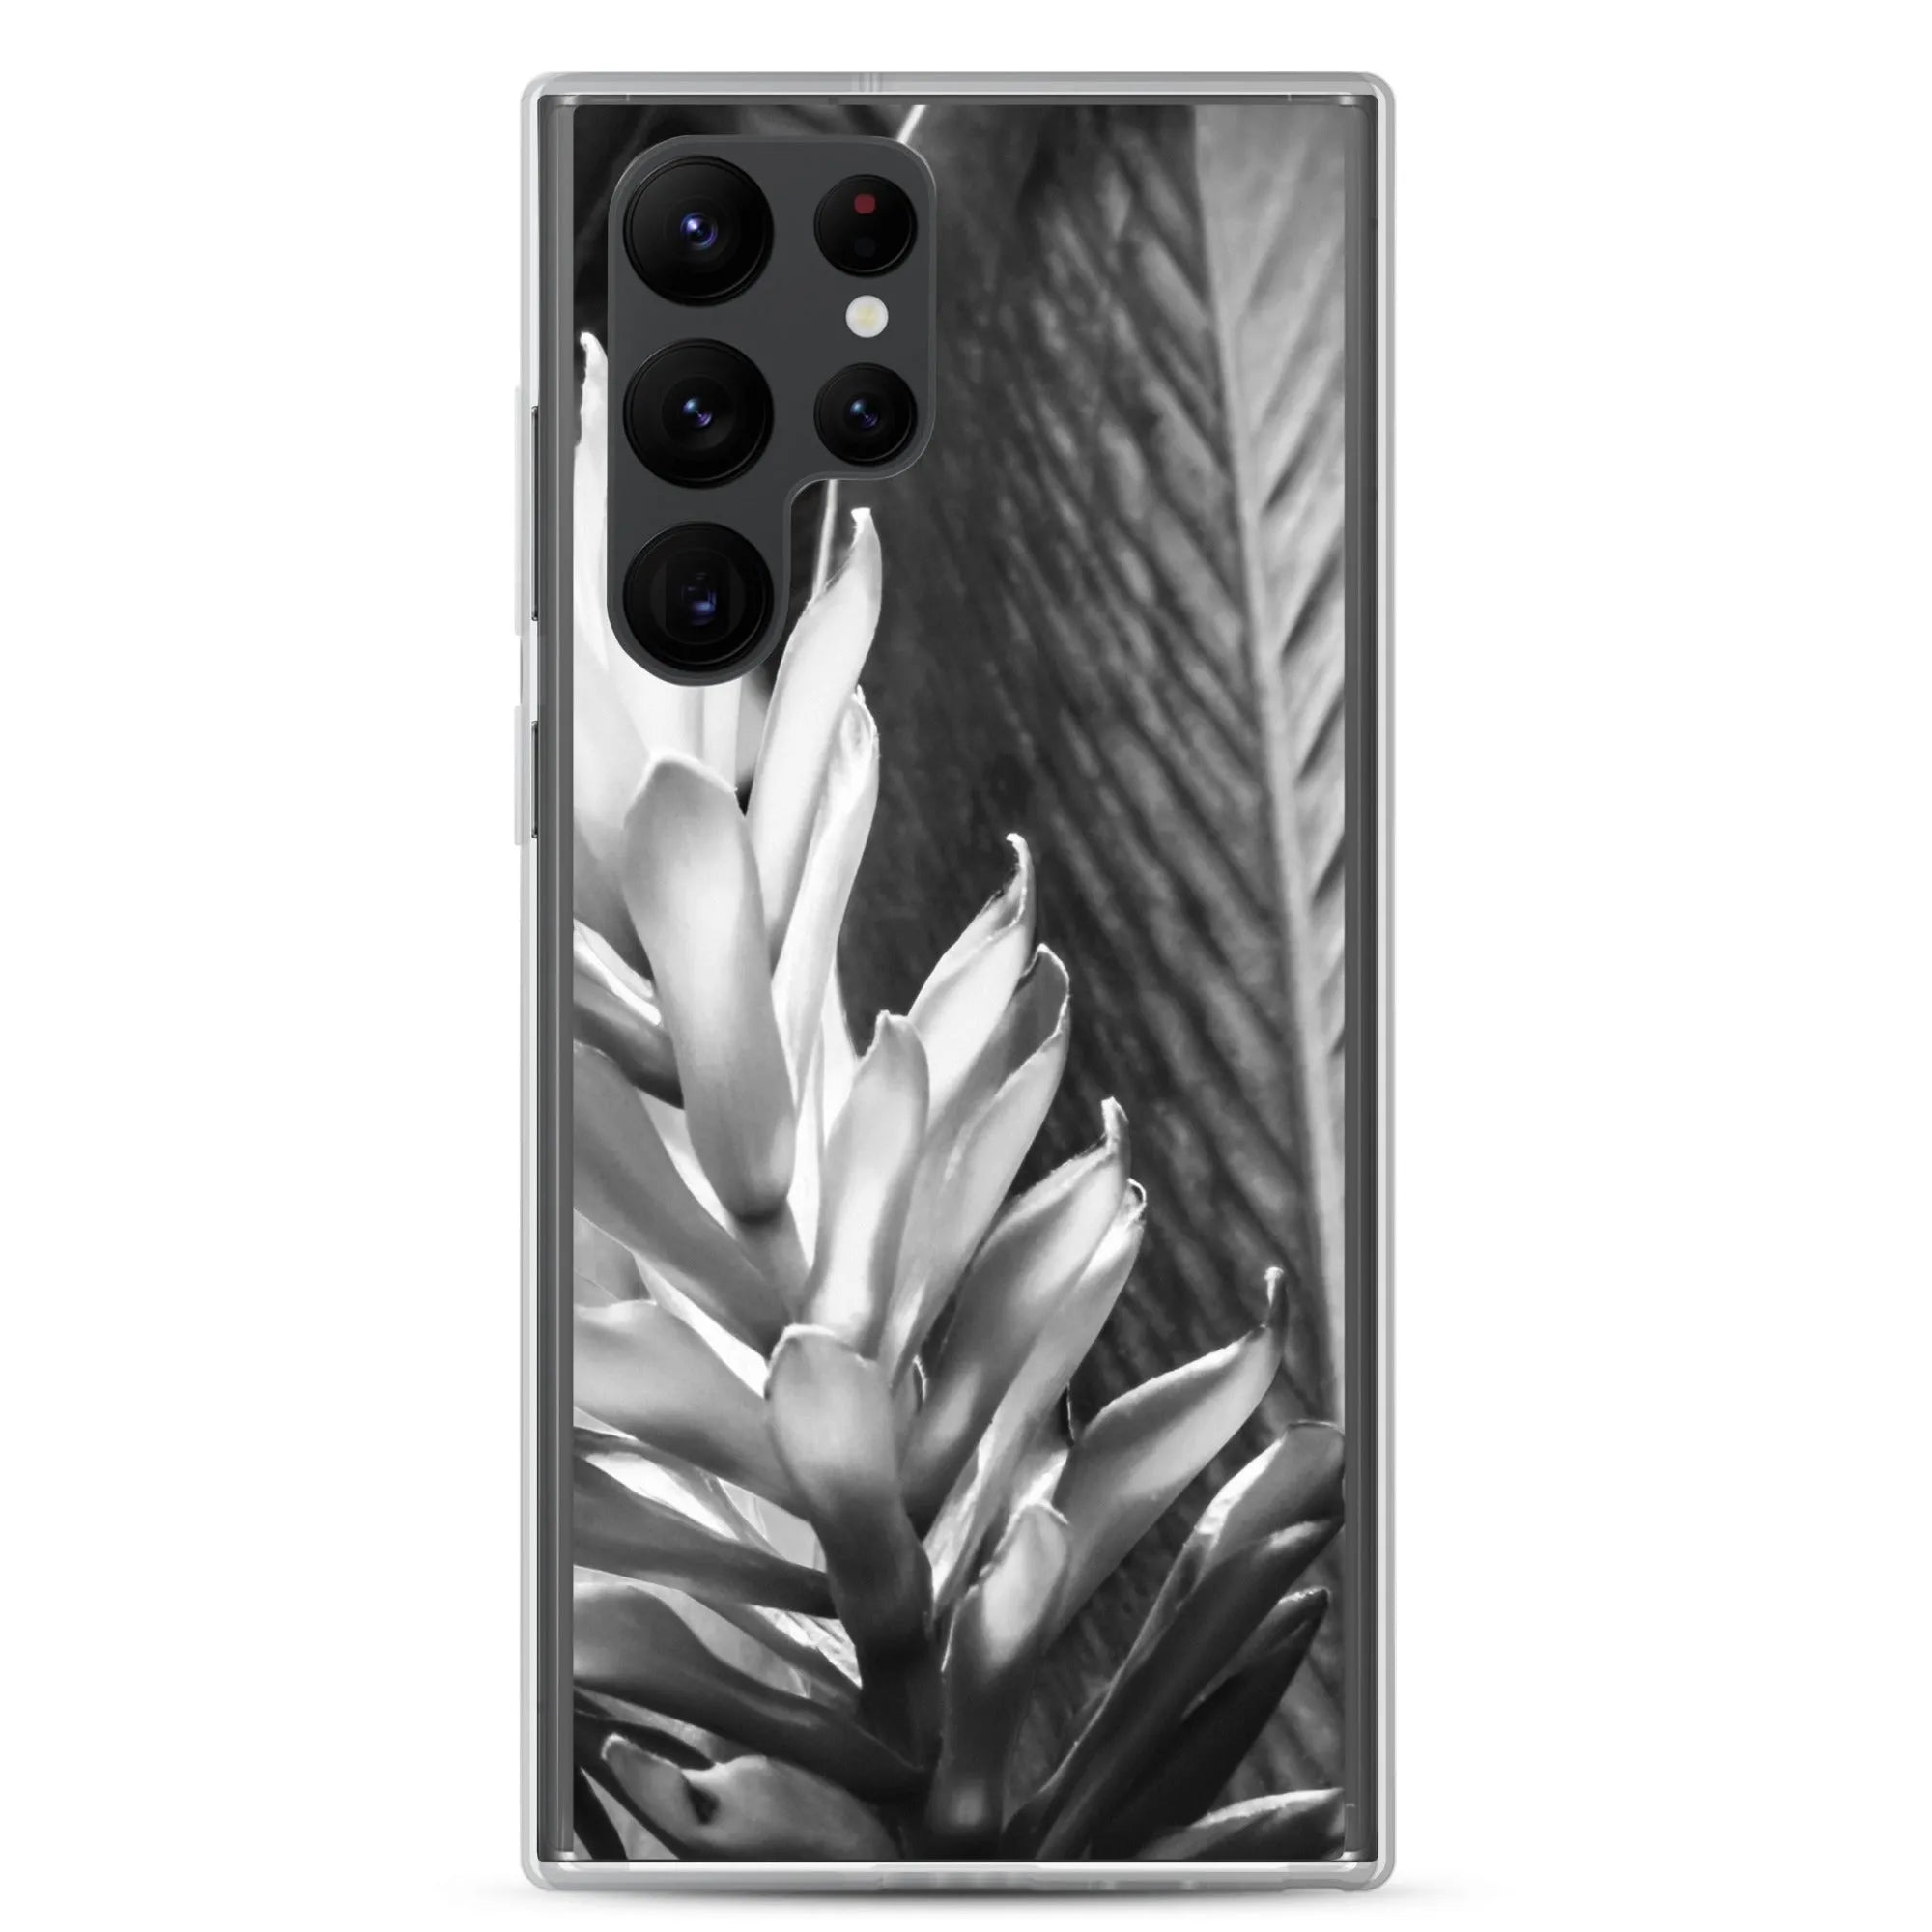 Siren Samsung Galaxy Case - Black And White - Samsung Galaxy S22 Ultra - Mobile Phone Cases - Aesthetic Art